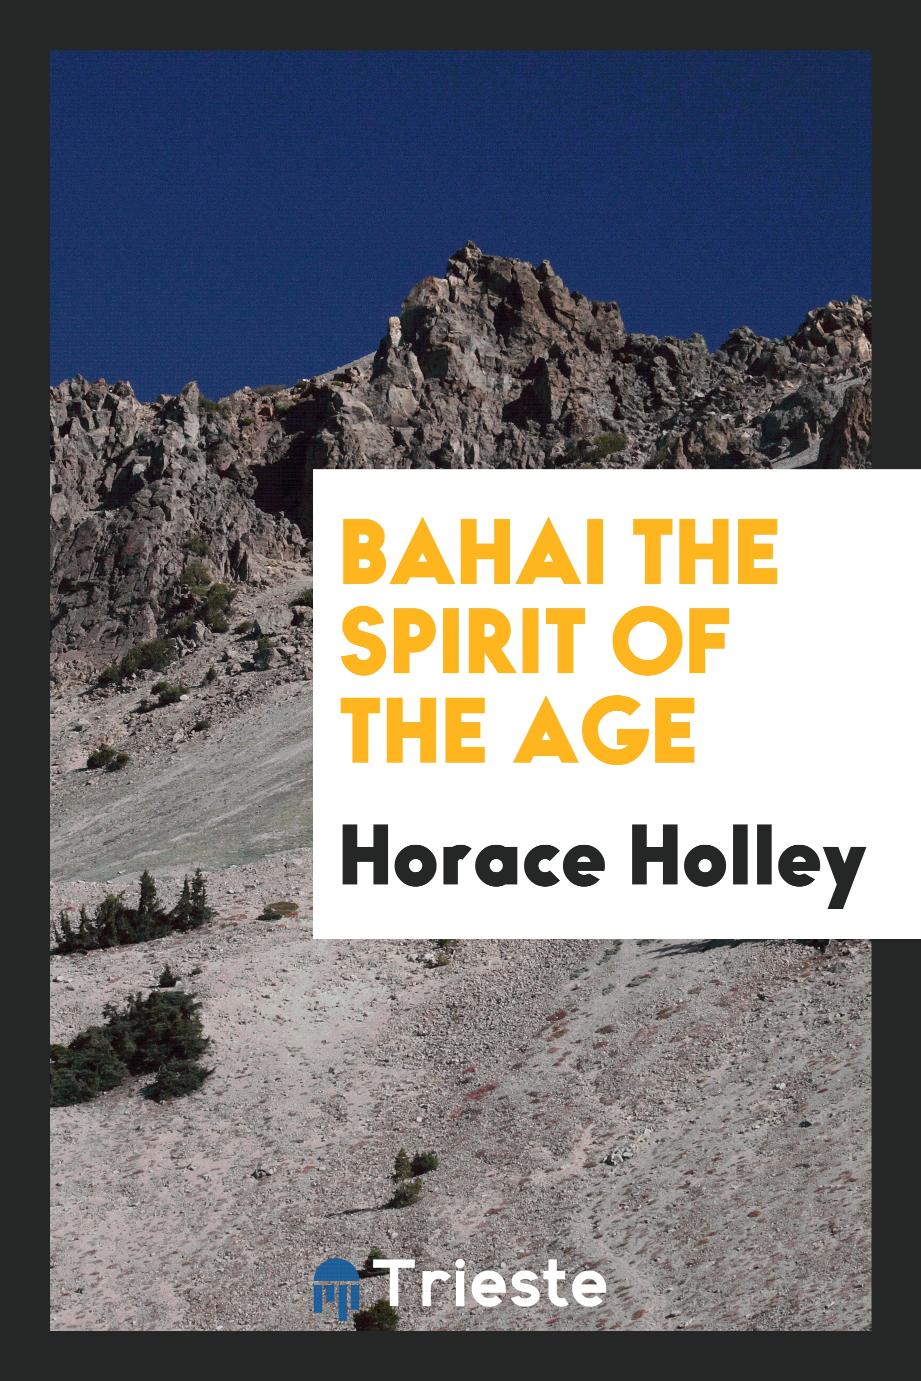 Bahai the spirit of the age